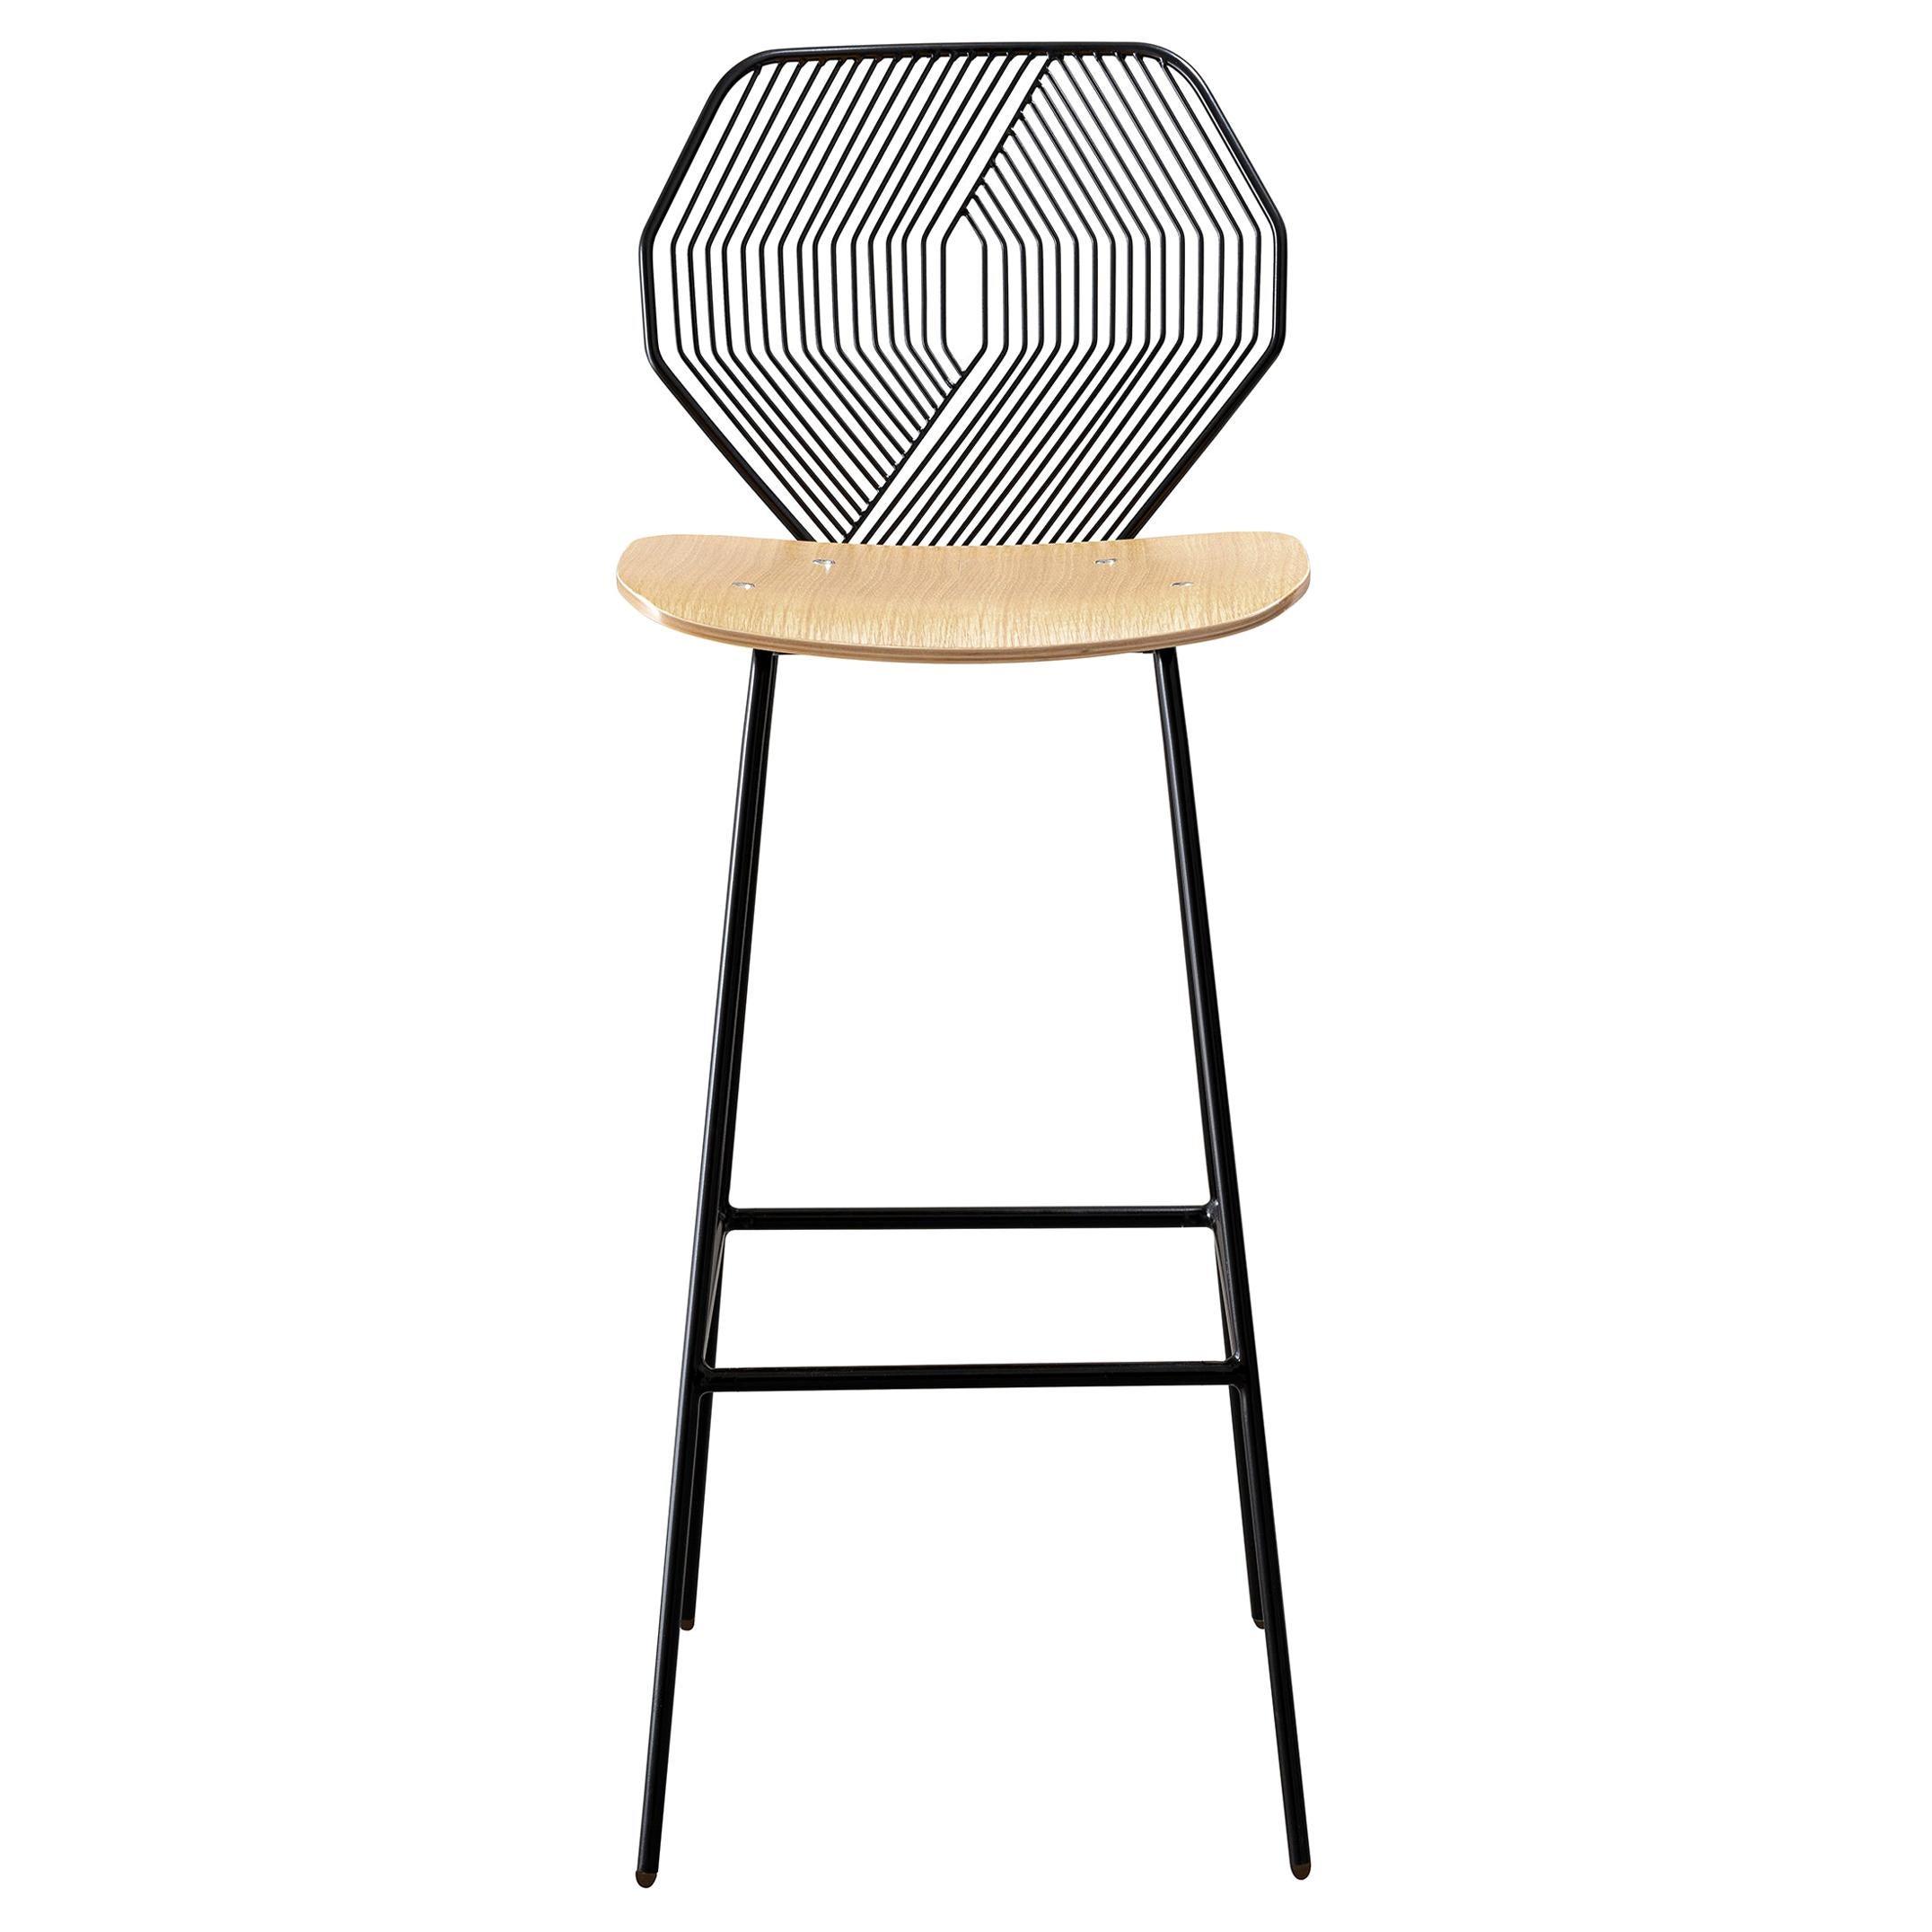 Modern Wire Bar Stool with a Wood Seat, Wood and Wire Bar Stool in Black